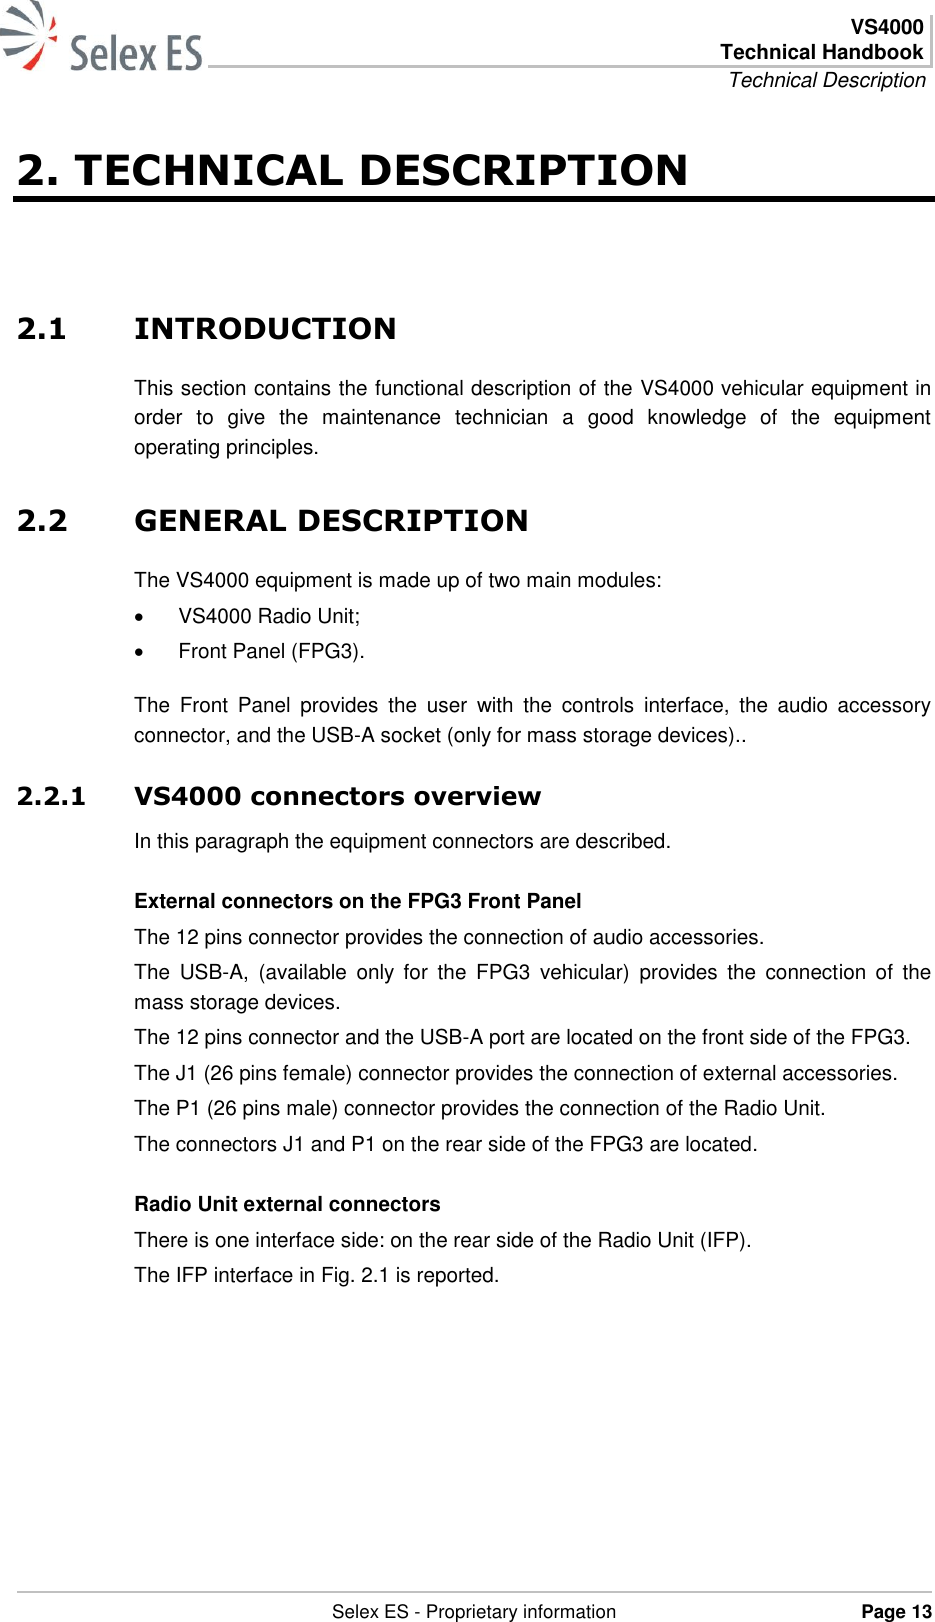  VS4000 Technical Handbook Technical Description   Selex ES - Proprietary information Page 13  2. TECHNICAL DESCRIPTION 2.1 INTRODUCTION This section contains the functional description of the VS4000 vehicular equipment in order  to  give  the  maintenance  technician  a  good  knowledge  of  the  equipment operating principles. 2.2 GENERAL DESCRIPTION The VS4000 equipment is made up of two main modules:   VS4000 Radio Unit;   Front Panel (FPG3). The  Front  Panel  provides  the  user  with  the  controls  interface,  the  audio  accessory connector, and the USB-A socket (only for mass storage devices).. 2.2.1 VS4000 connectors overview In this paragraph the equipment connectors are described. External connectors on the FPG3 Front Panel The 12 pins connector provides the connection of audio accessories. The  USB-A,  (available  only  for  the  FPG3  vehicular)  provides  the  connection  of  the mass storage devices. The 12 pins connector and the USB-A port are located on the front side of the FPG3. The J1 (26 pins female) connector provides the connection of external accessories. The P1 (26 pins male) connector provides the connection of the Radio Unit. The connectors J1 and P1 on the rear side of the FPG3 are located. Radio Unit external connectors There is one interface side: on the rear side of the Radio Unit (IFP). The IFP interface in Fig. 2.1 is reported. 